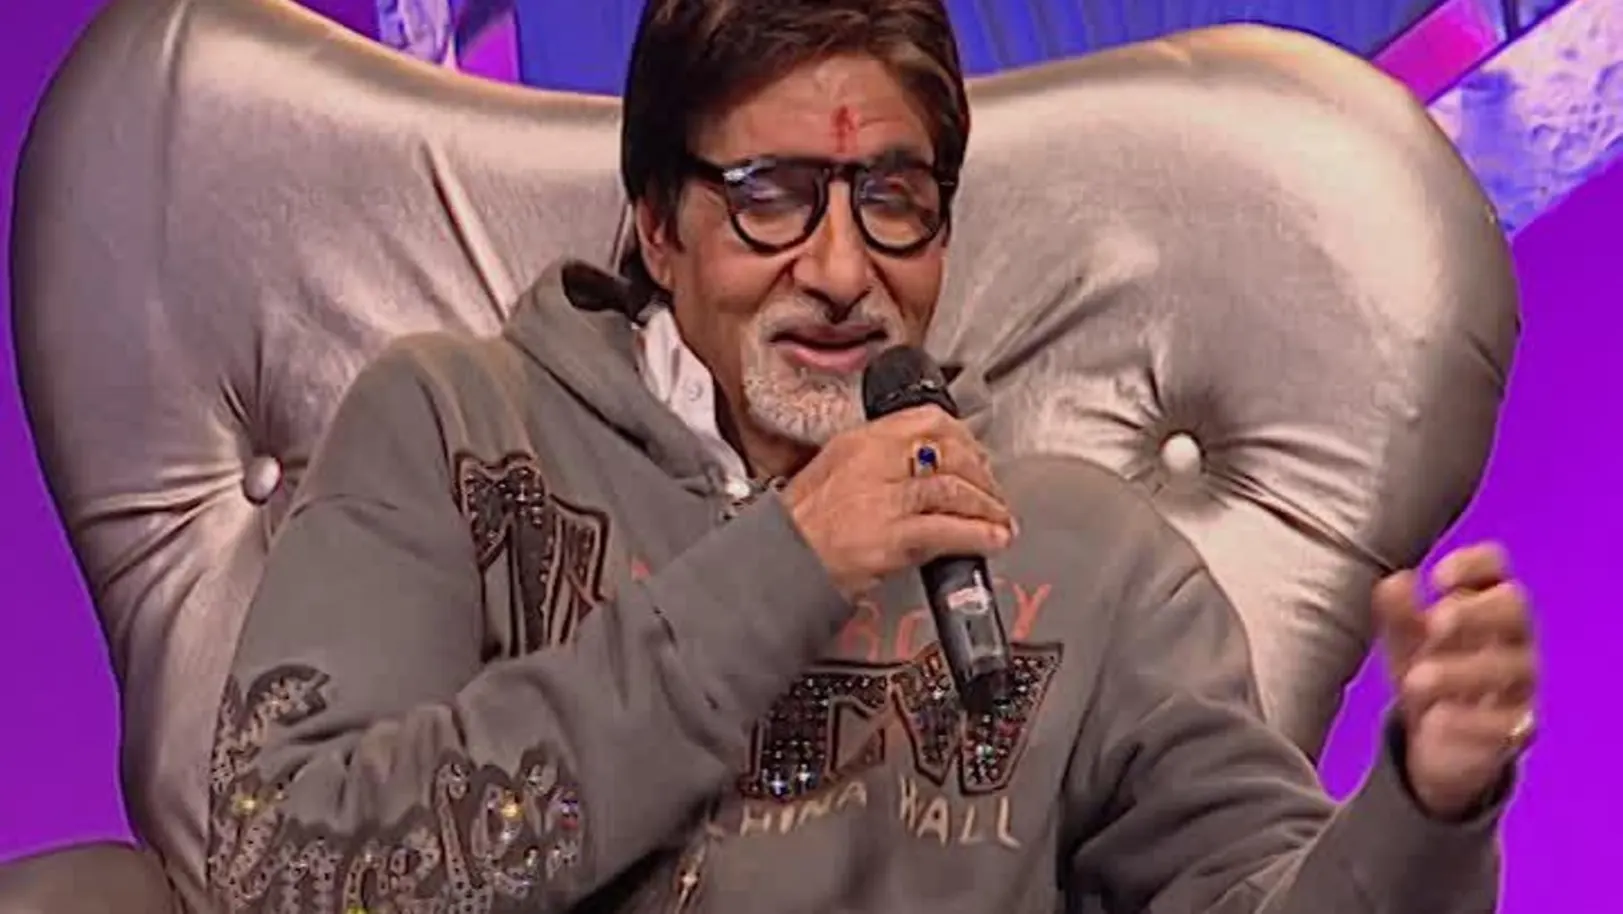 Amitabh impressed with the dancers - Ep13, Dance India Dance Season 2 Episode 13